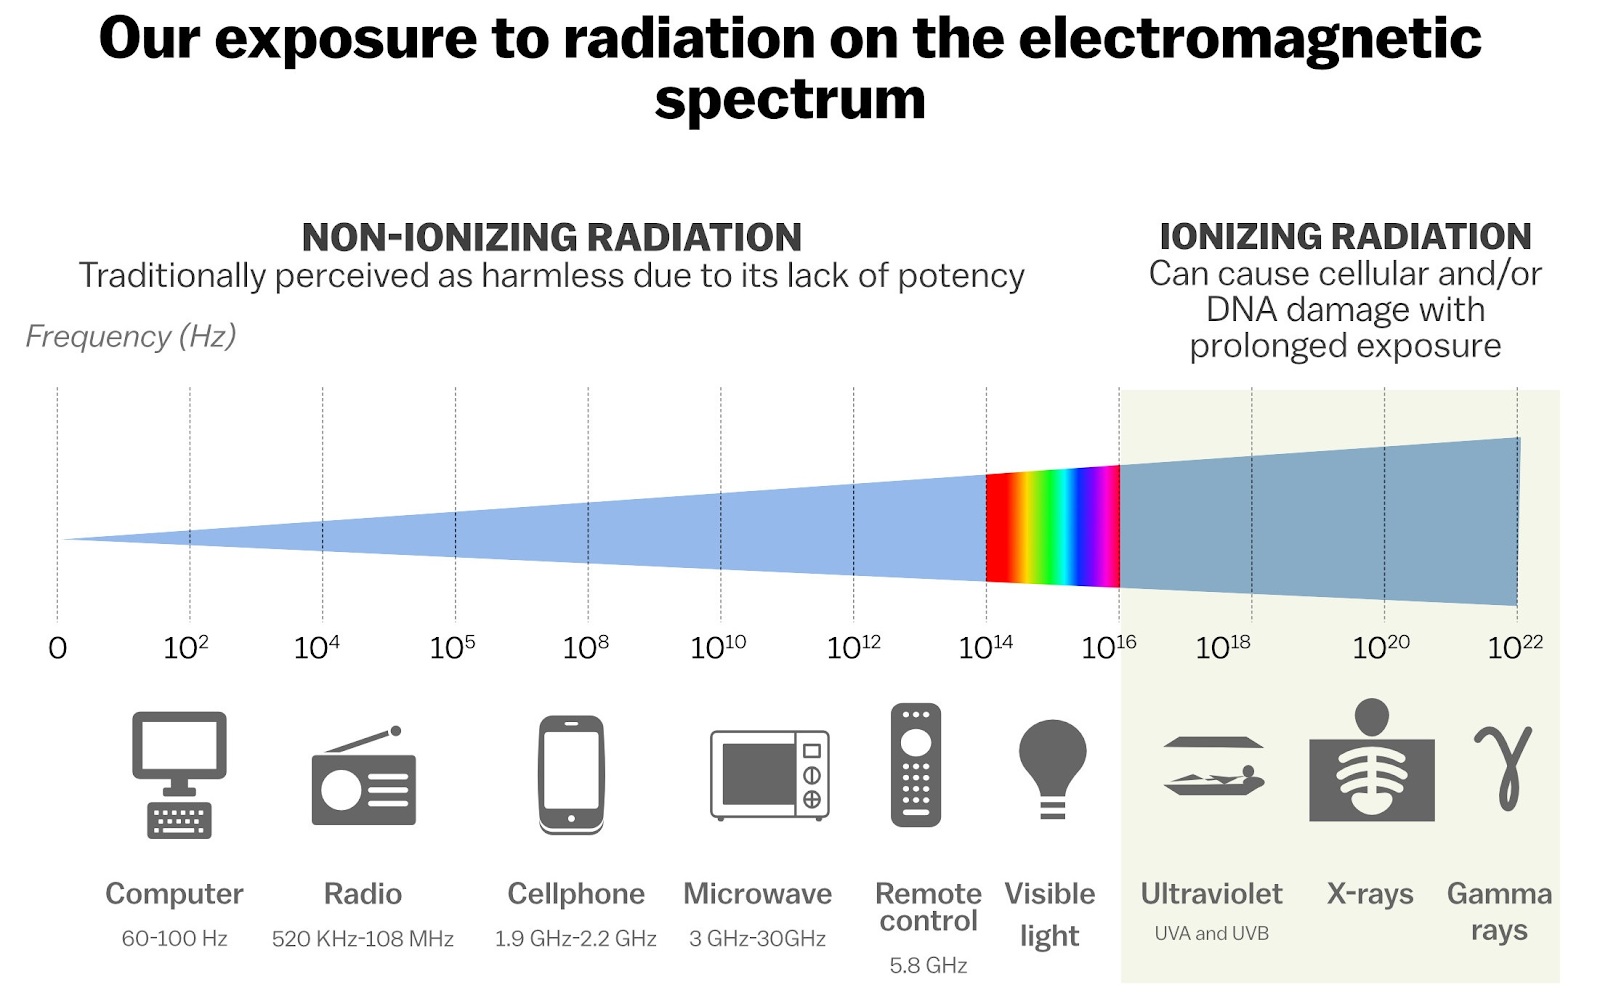 The risks of different products based on their placement on the electromagnetic spectrum